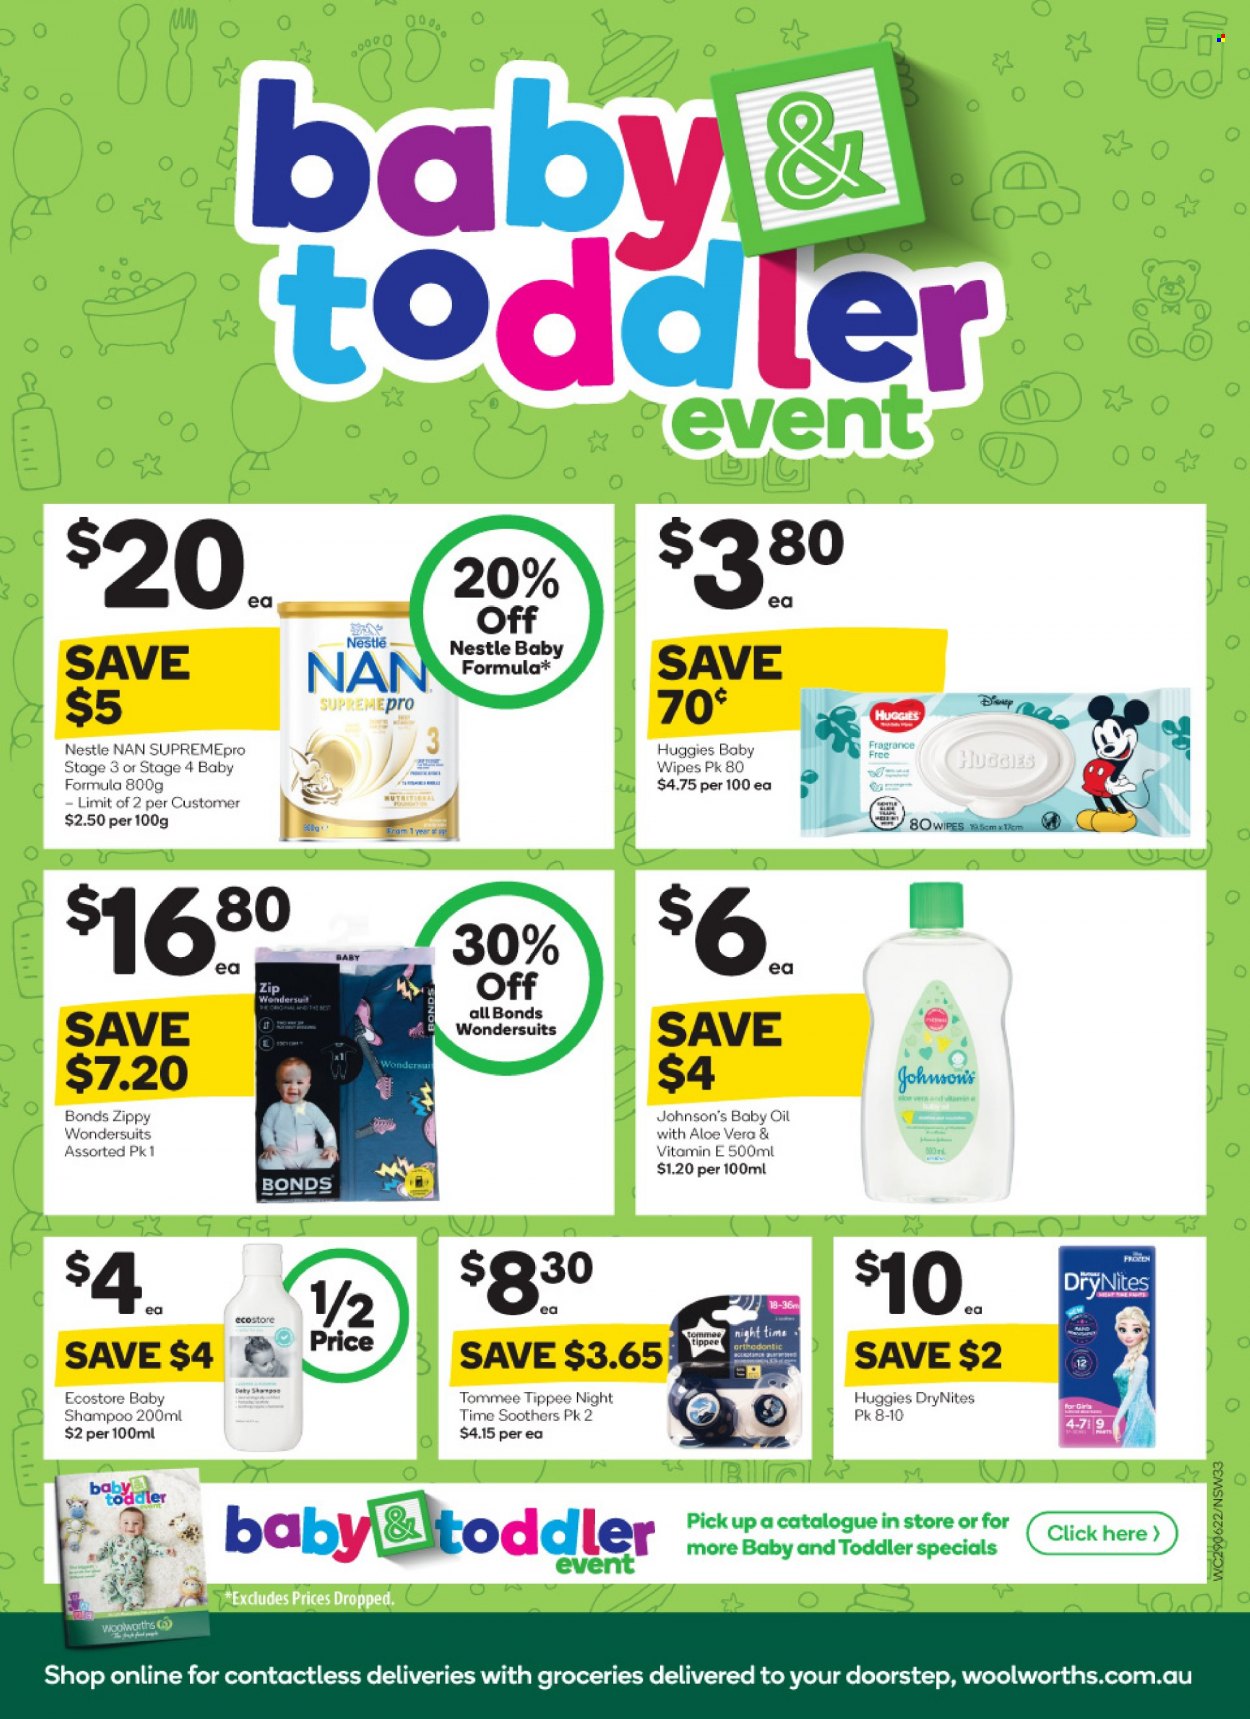 thumbnail - Woolworths Catalogue - 29 Jun 2022 - 5 Jul 2022 - Sales products - Nestlé, oil, Nestlé NAN, wipes, Huggies, baby wipes, DryNites, Johnson's, baby oil, shampoo, Bonds. Page 33.